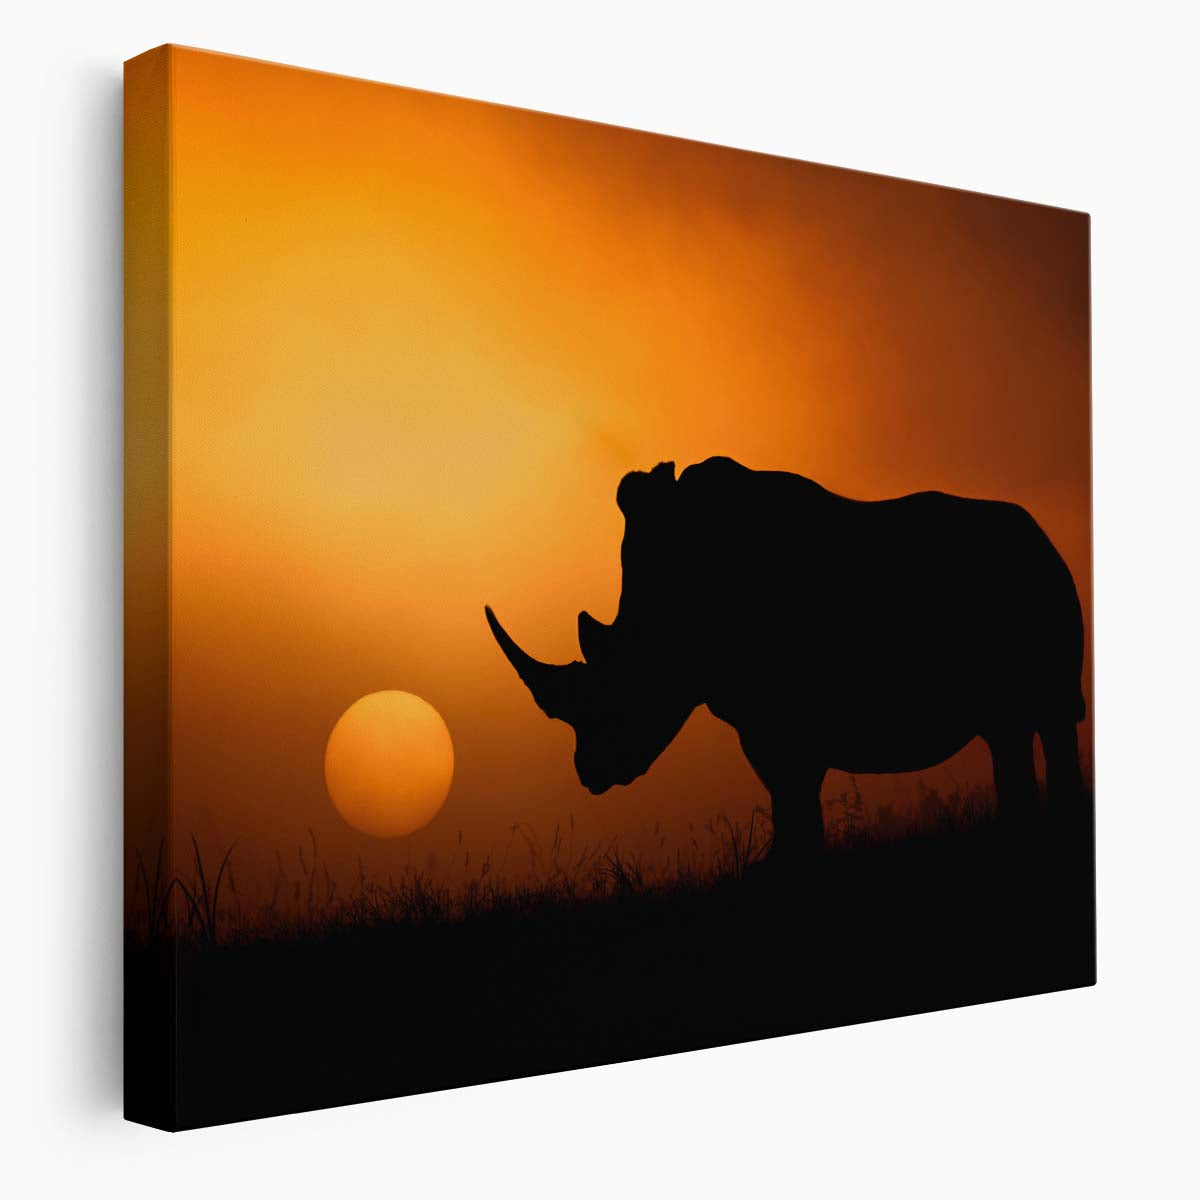 Misty Kruger Park Rhino Sunrise Safari Wall Art by Luxuriance Designs. Made in USA.